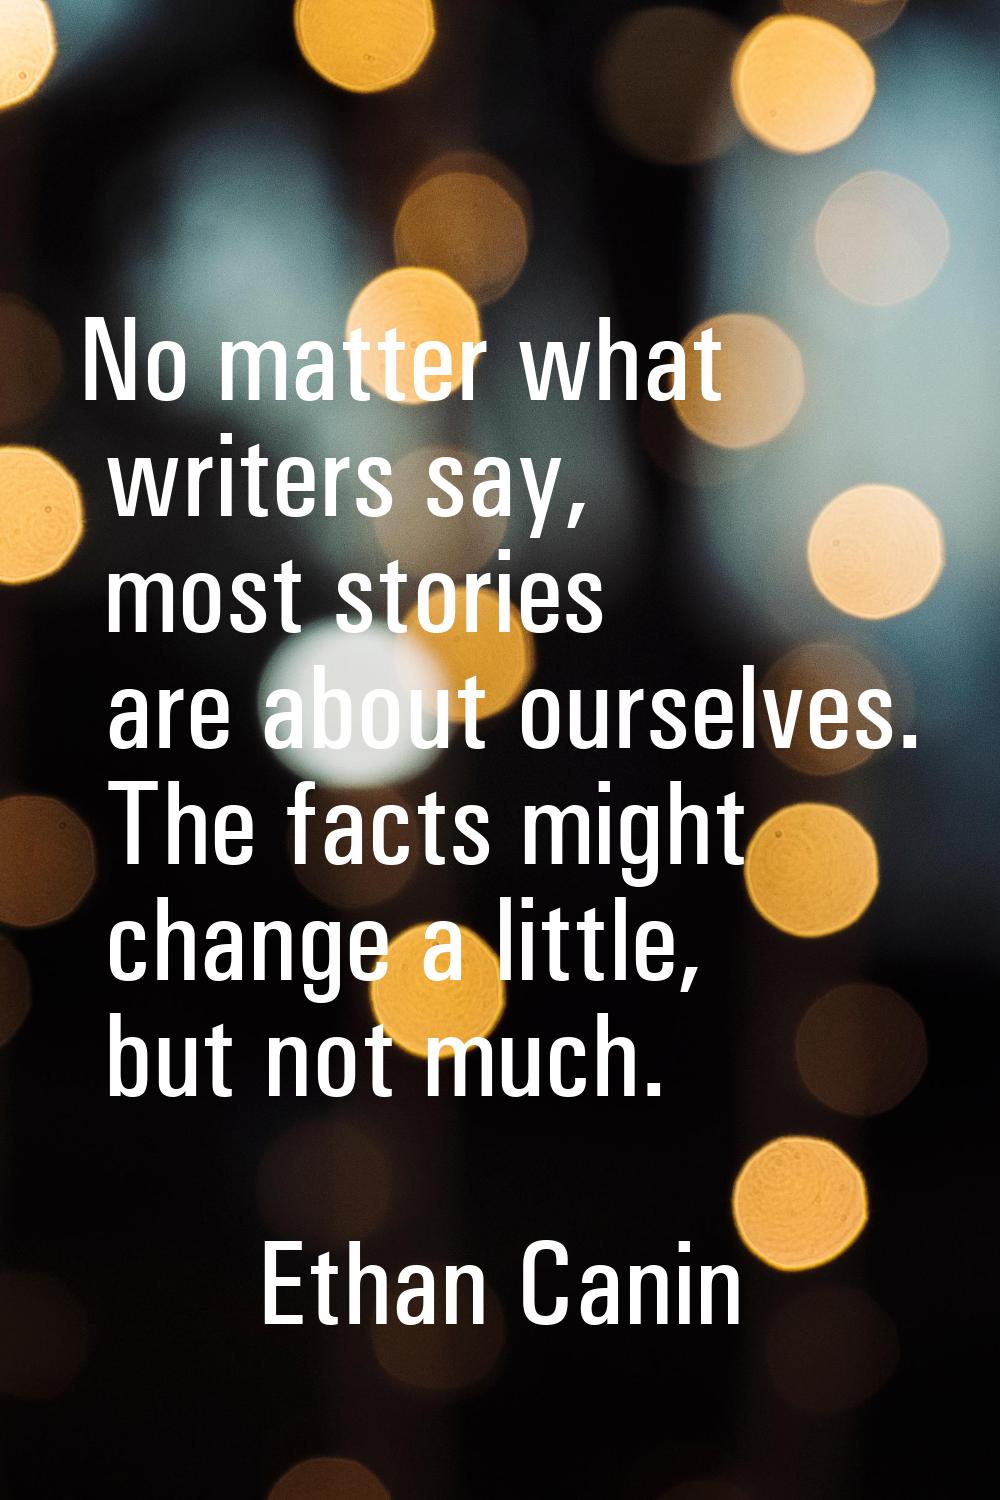 No matter what writers say, most stories are about ourselves. The facts might change a little, but 